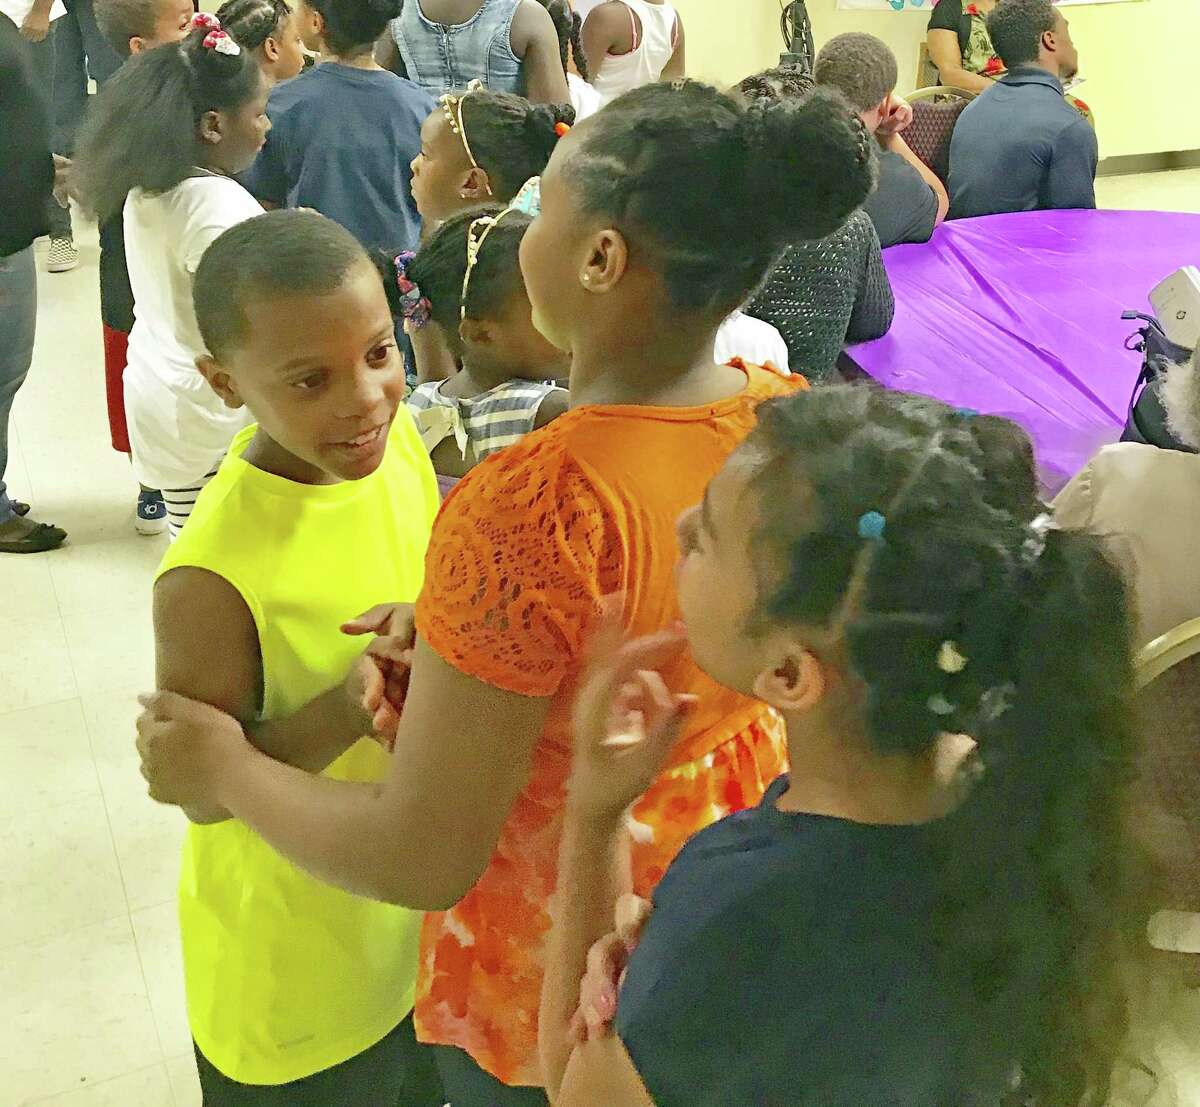 Shiloh Missionary Baptist Church recently collected over 100 book bags filled with school supplies in Middletown. Here, eager children queue up in line.